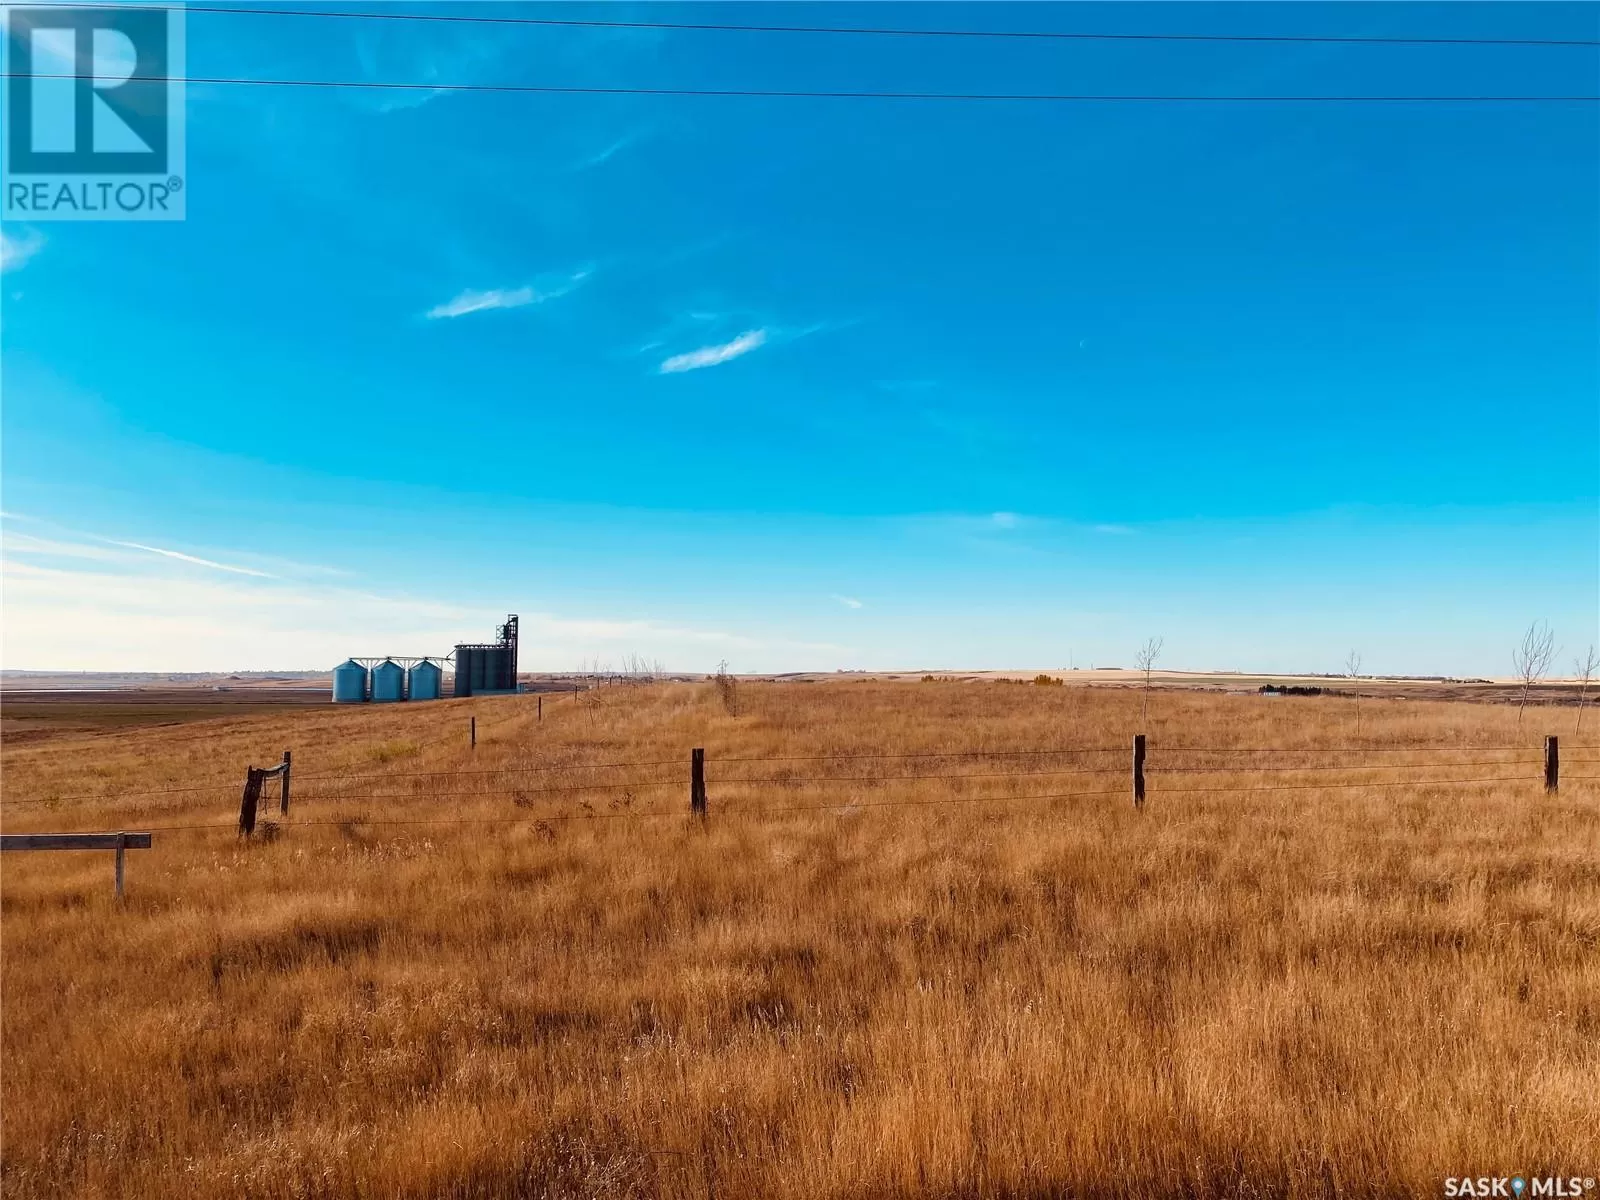 Unknown for rent: Acreage Lot East By Bronco Memorial, Swift Current Rm No. 137, Saskatchewan S9H 3N7